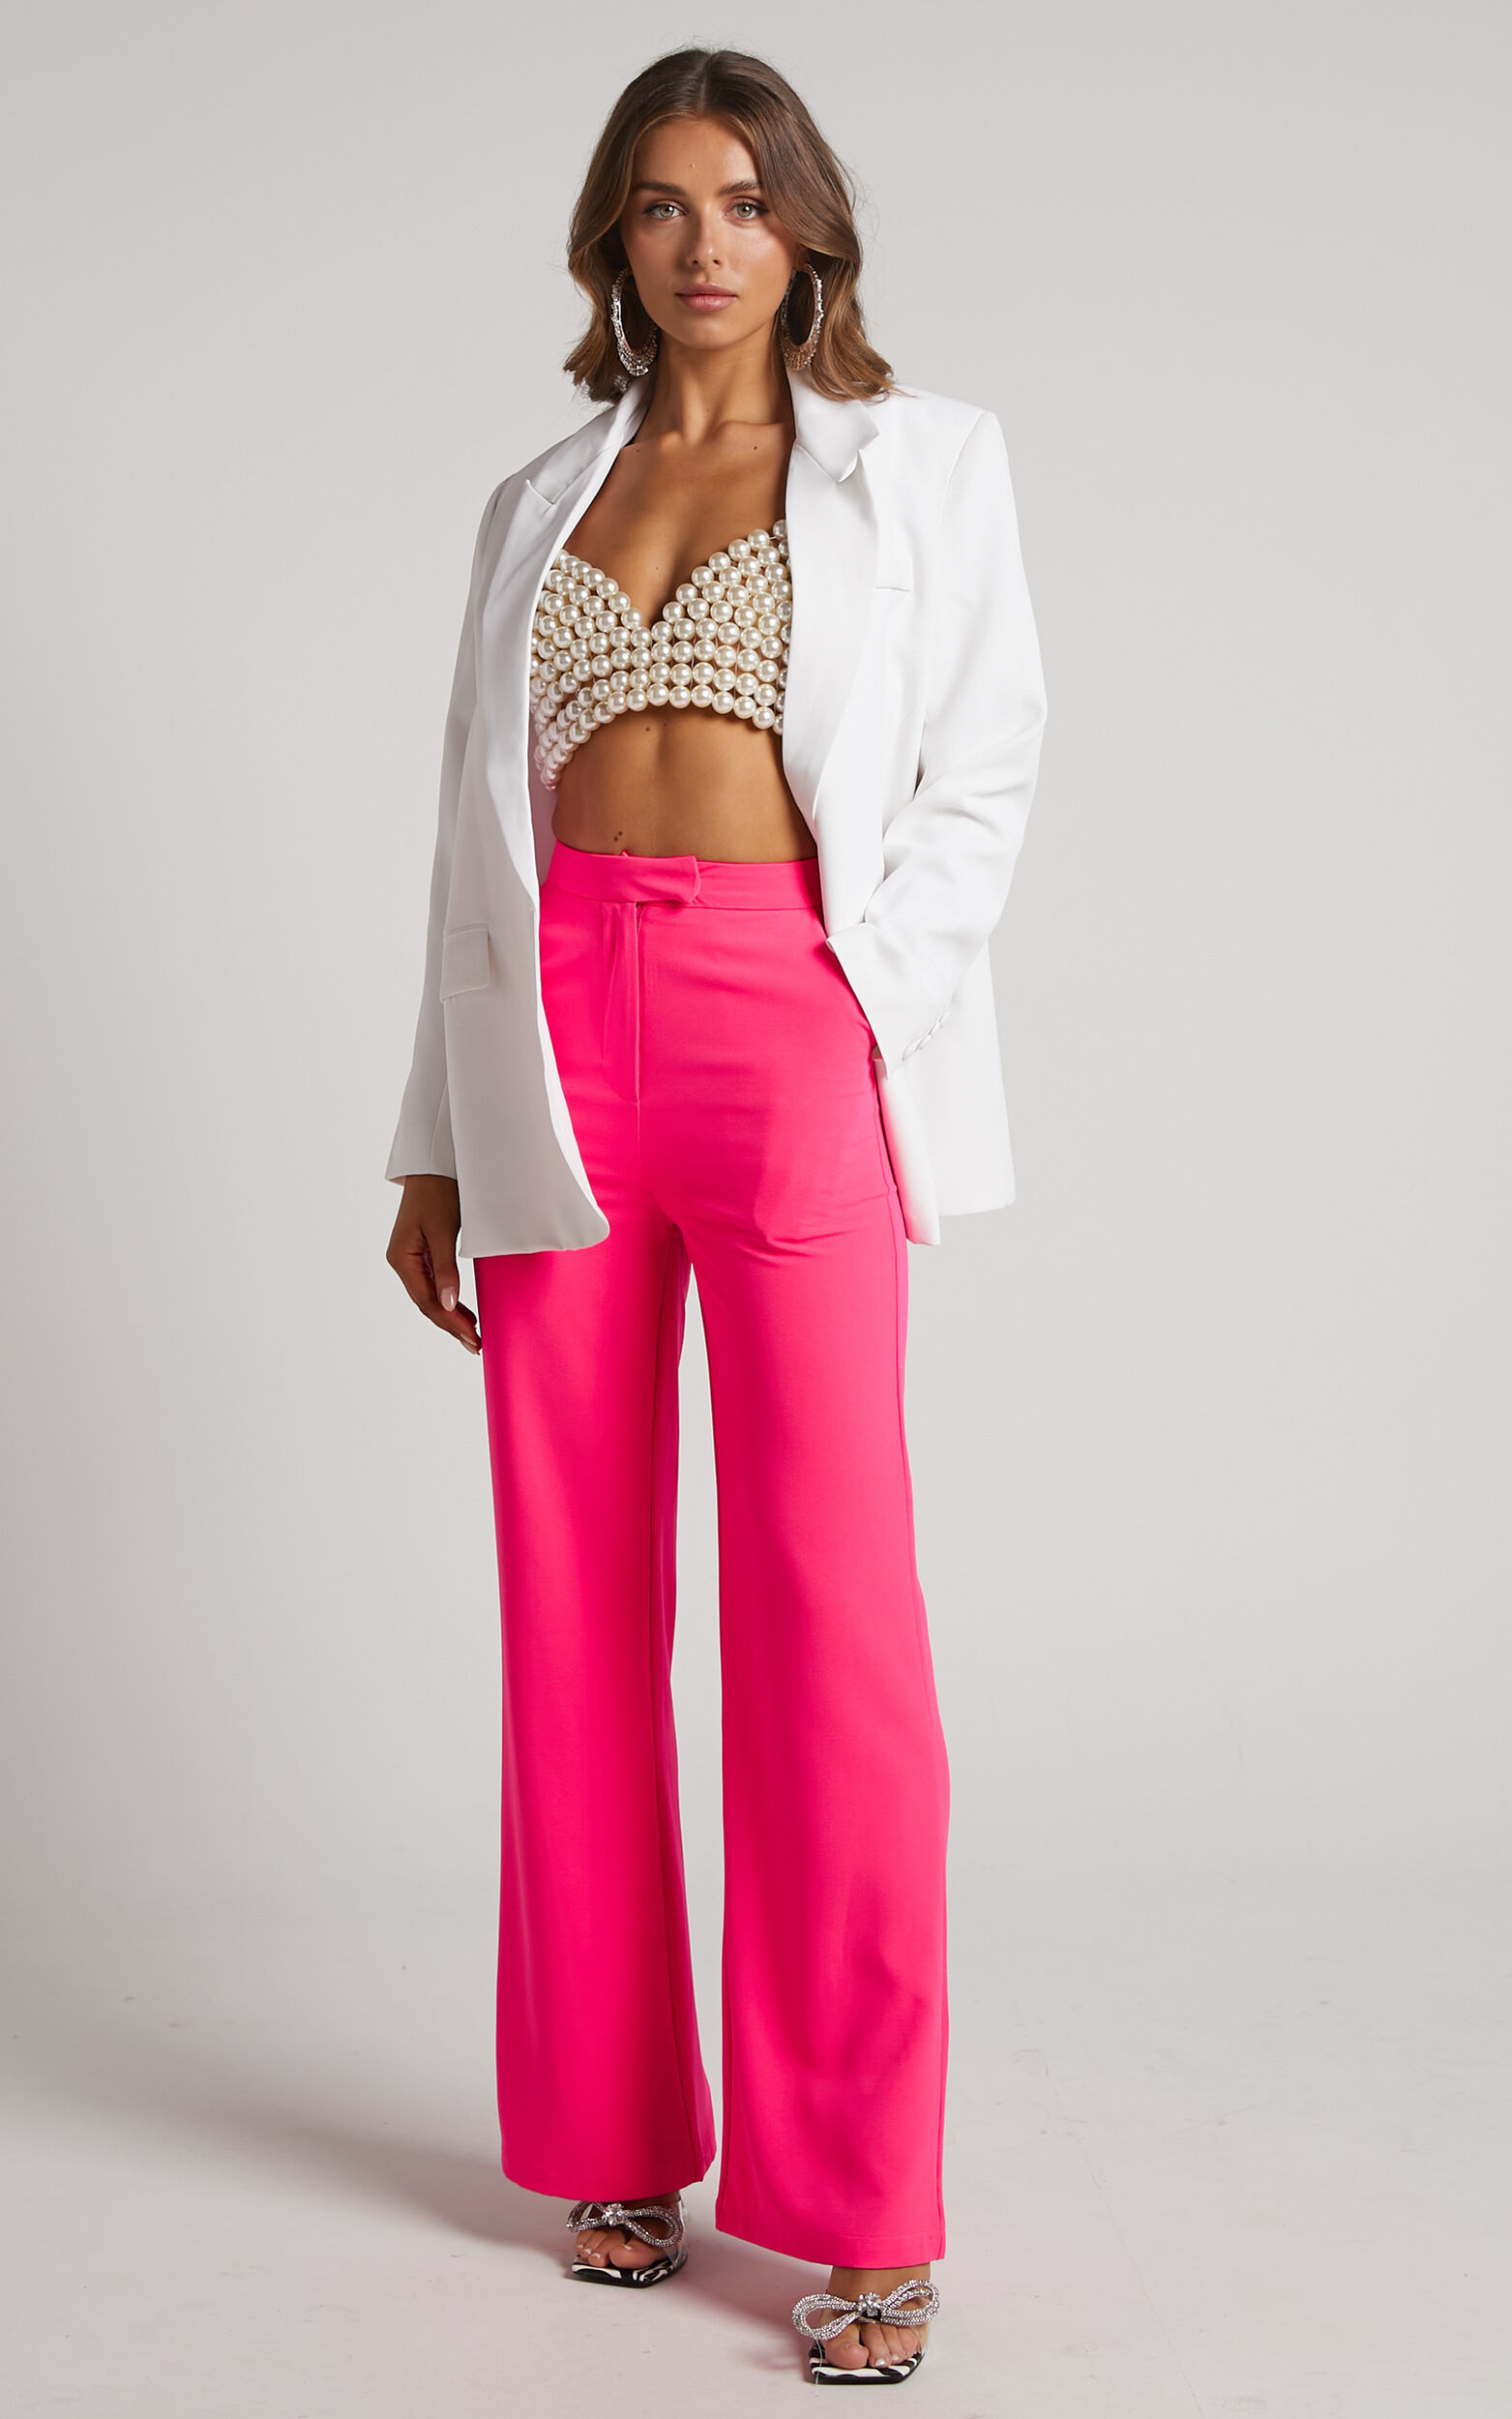 Kimmay Pants - High Waisted Tailored Straight Leg Pants in Hot Pink - 04, PNK2